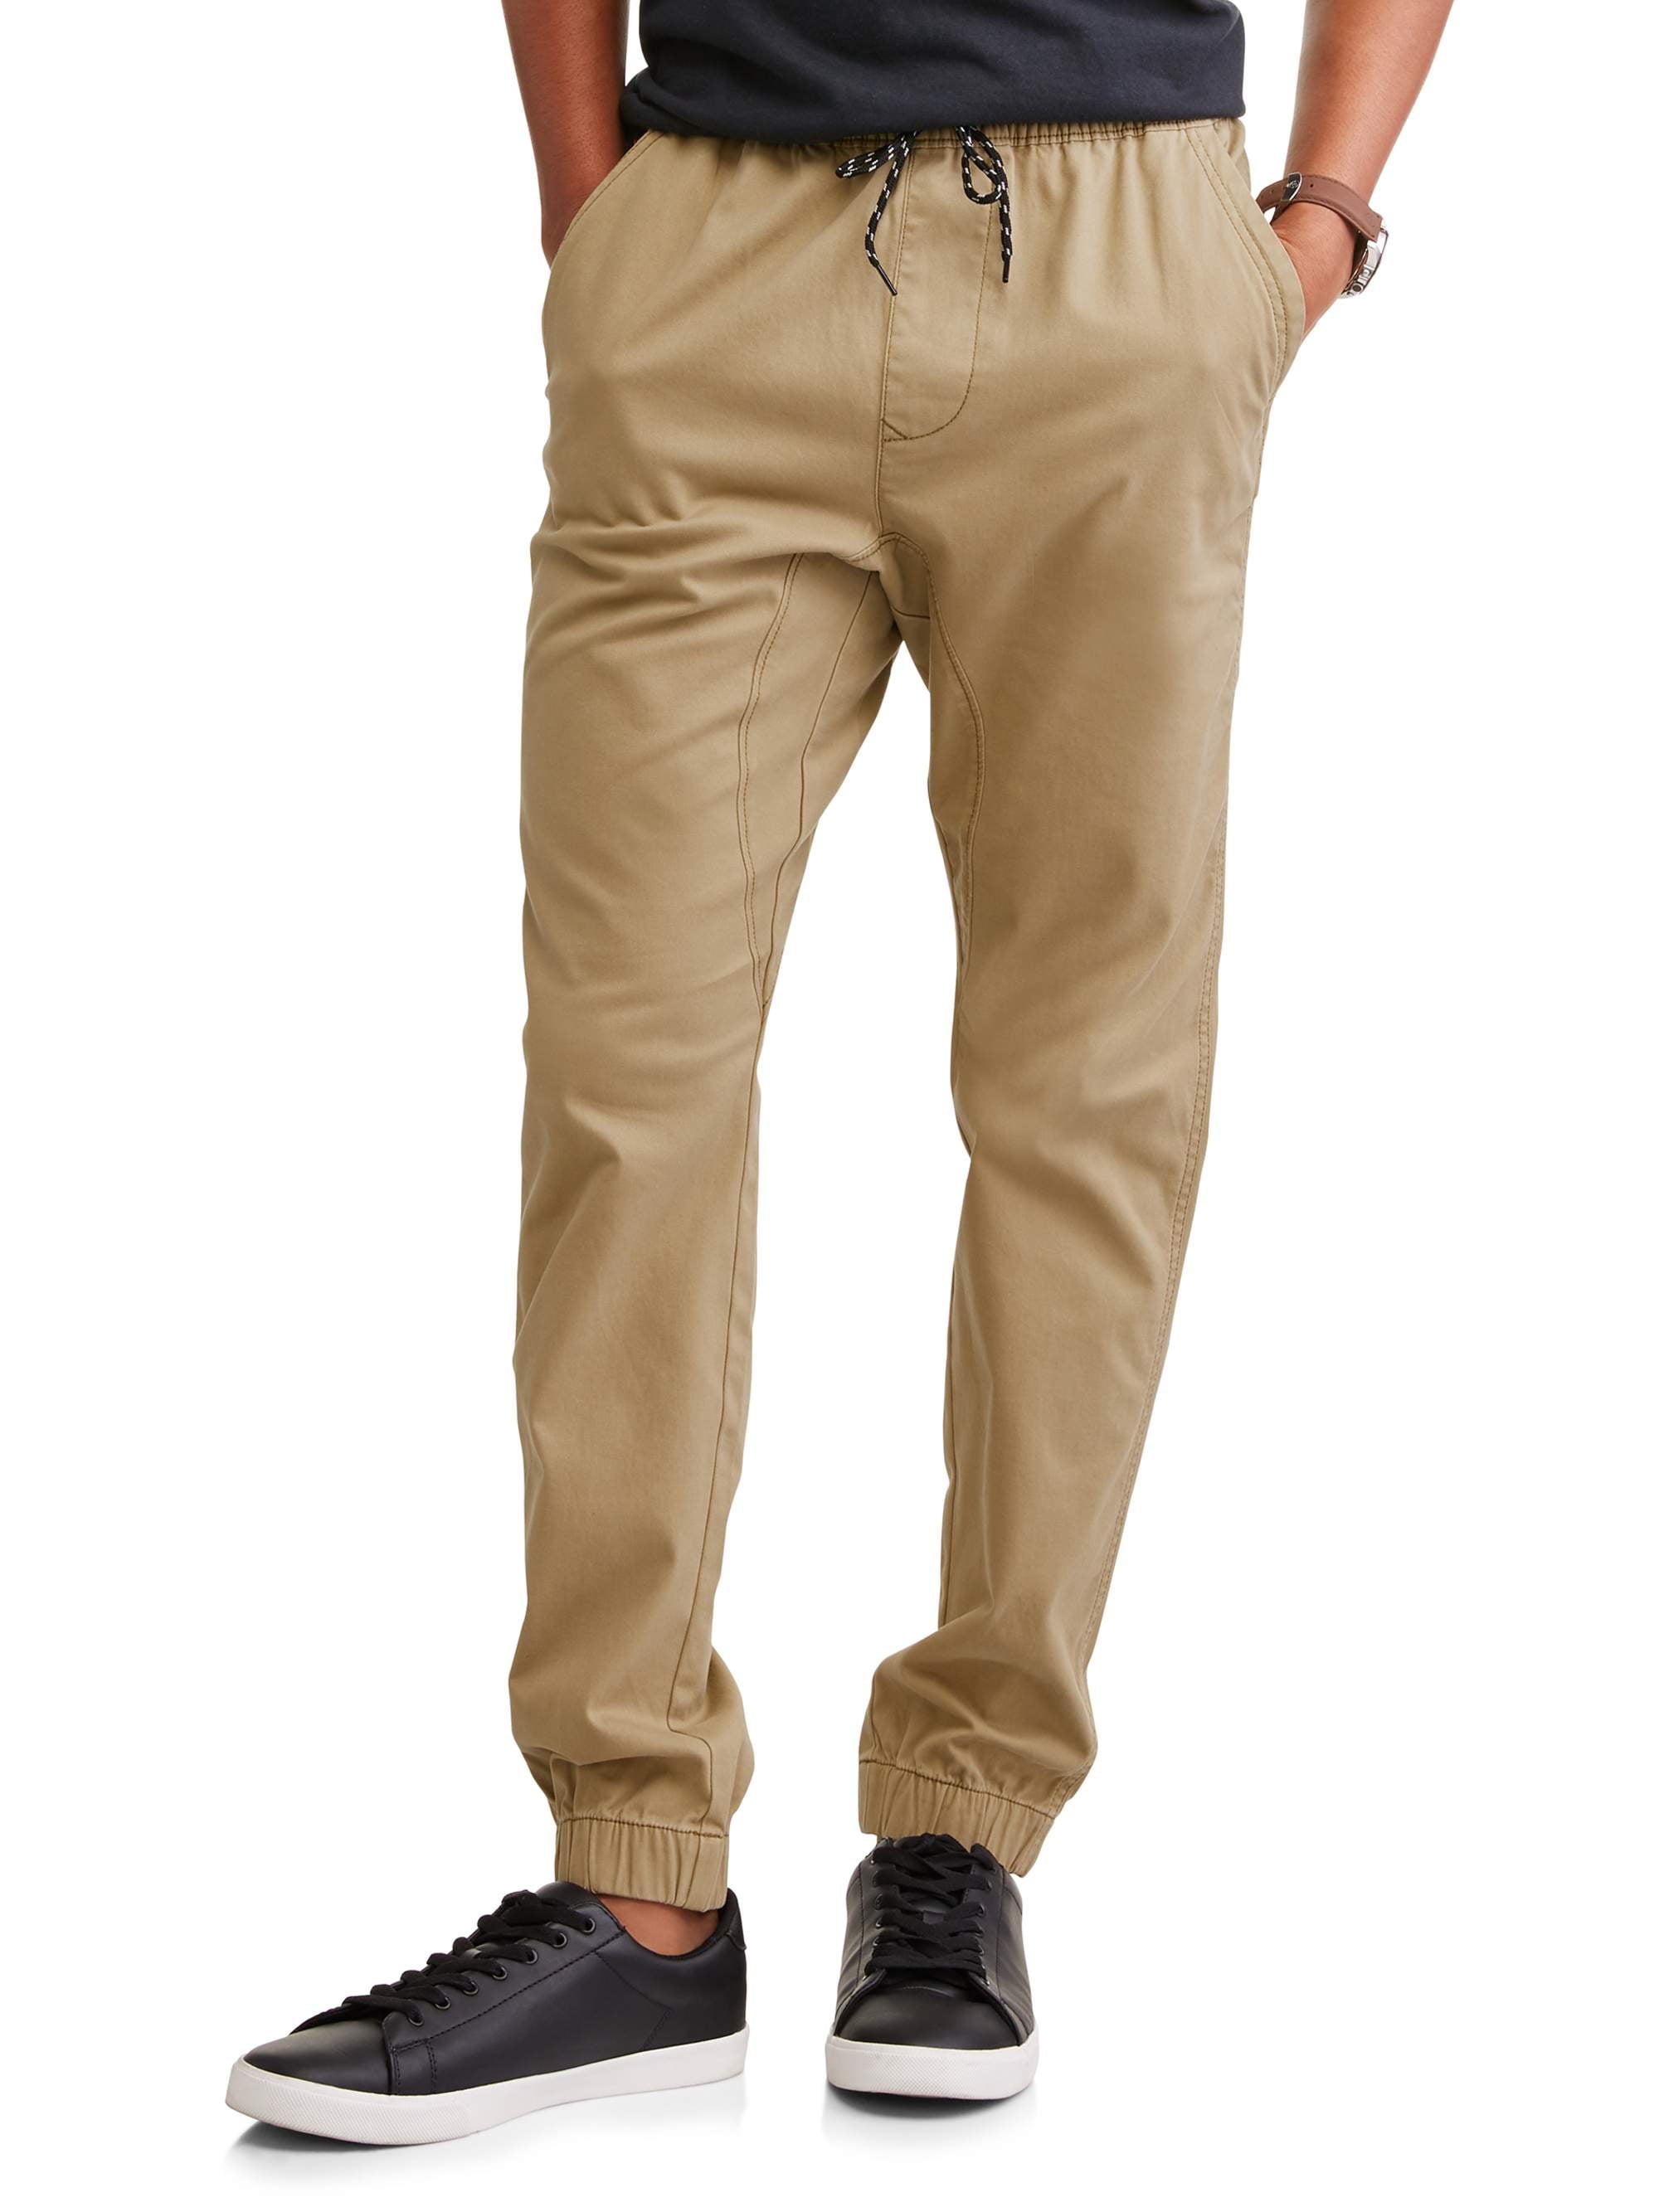 Twill Jogger Pants Pants for Men - JCPenney